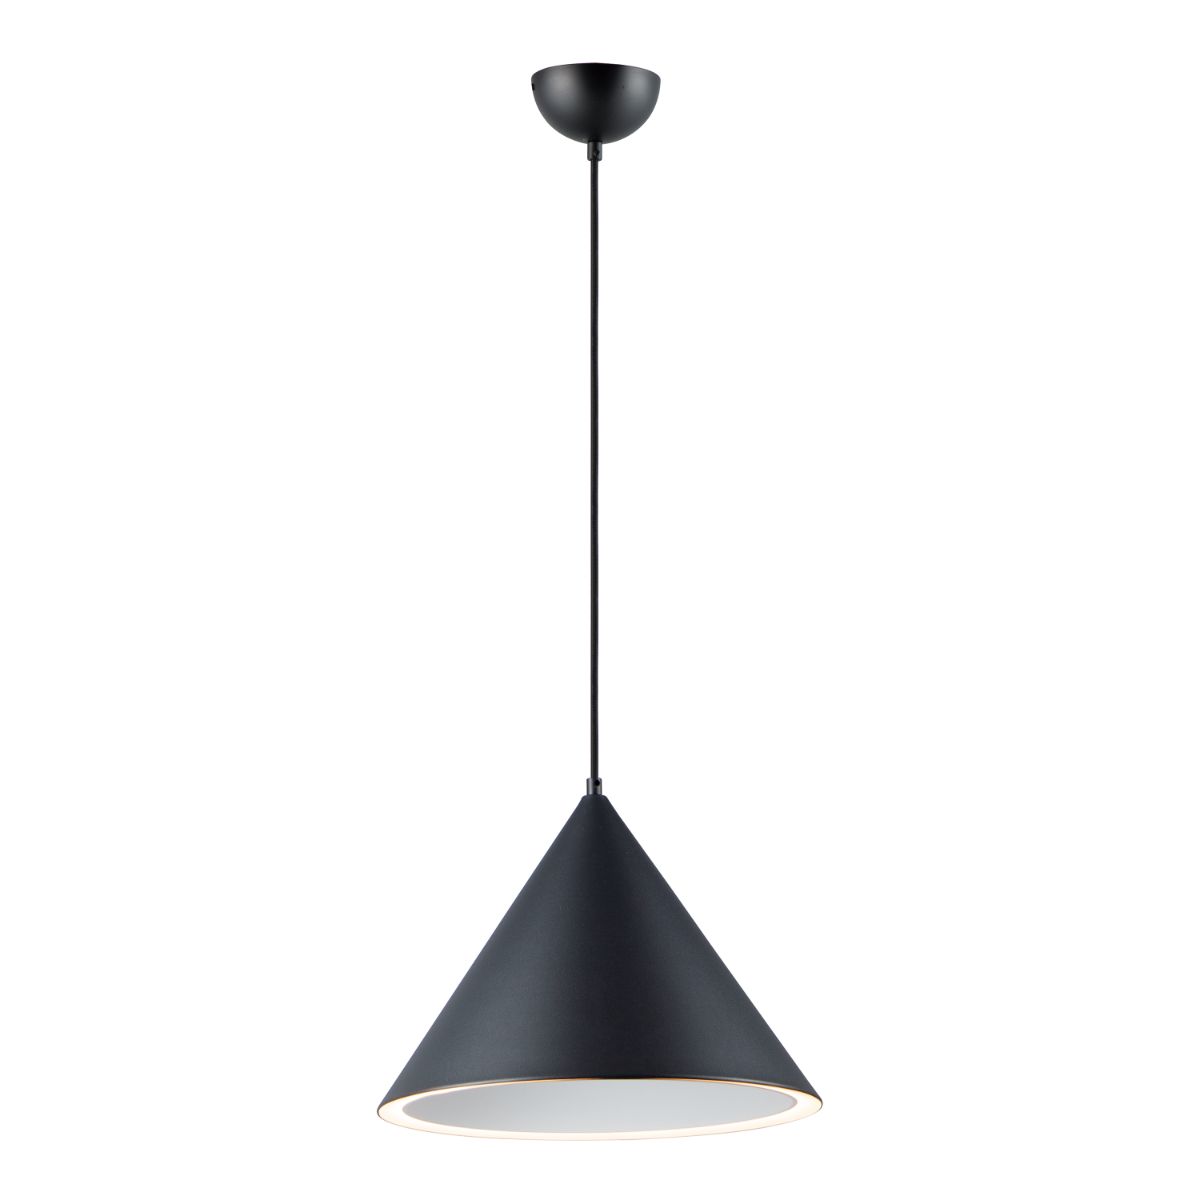 Abyss 16 in. LED Pendant Light